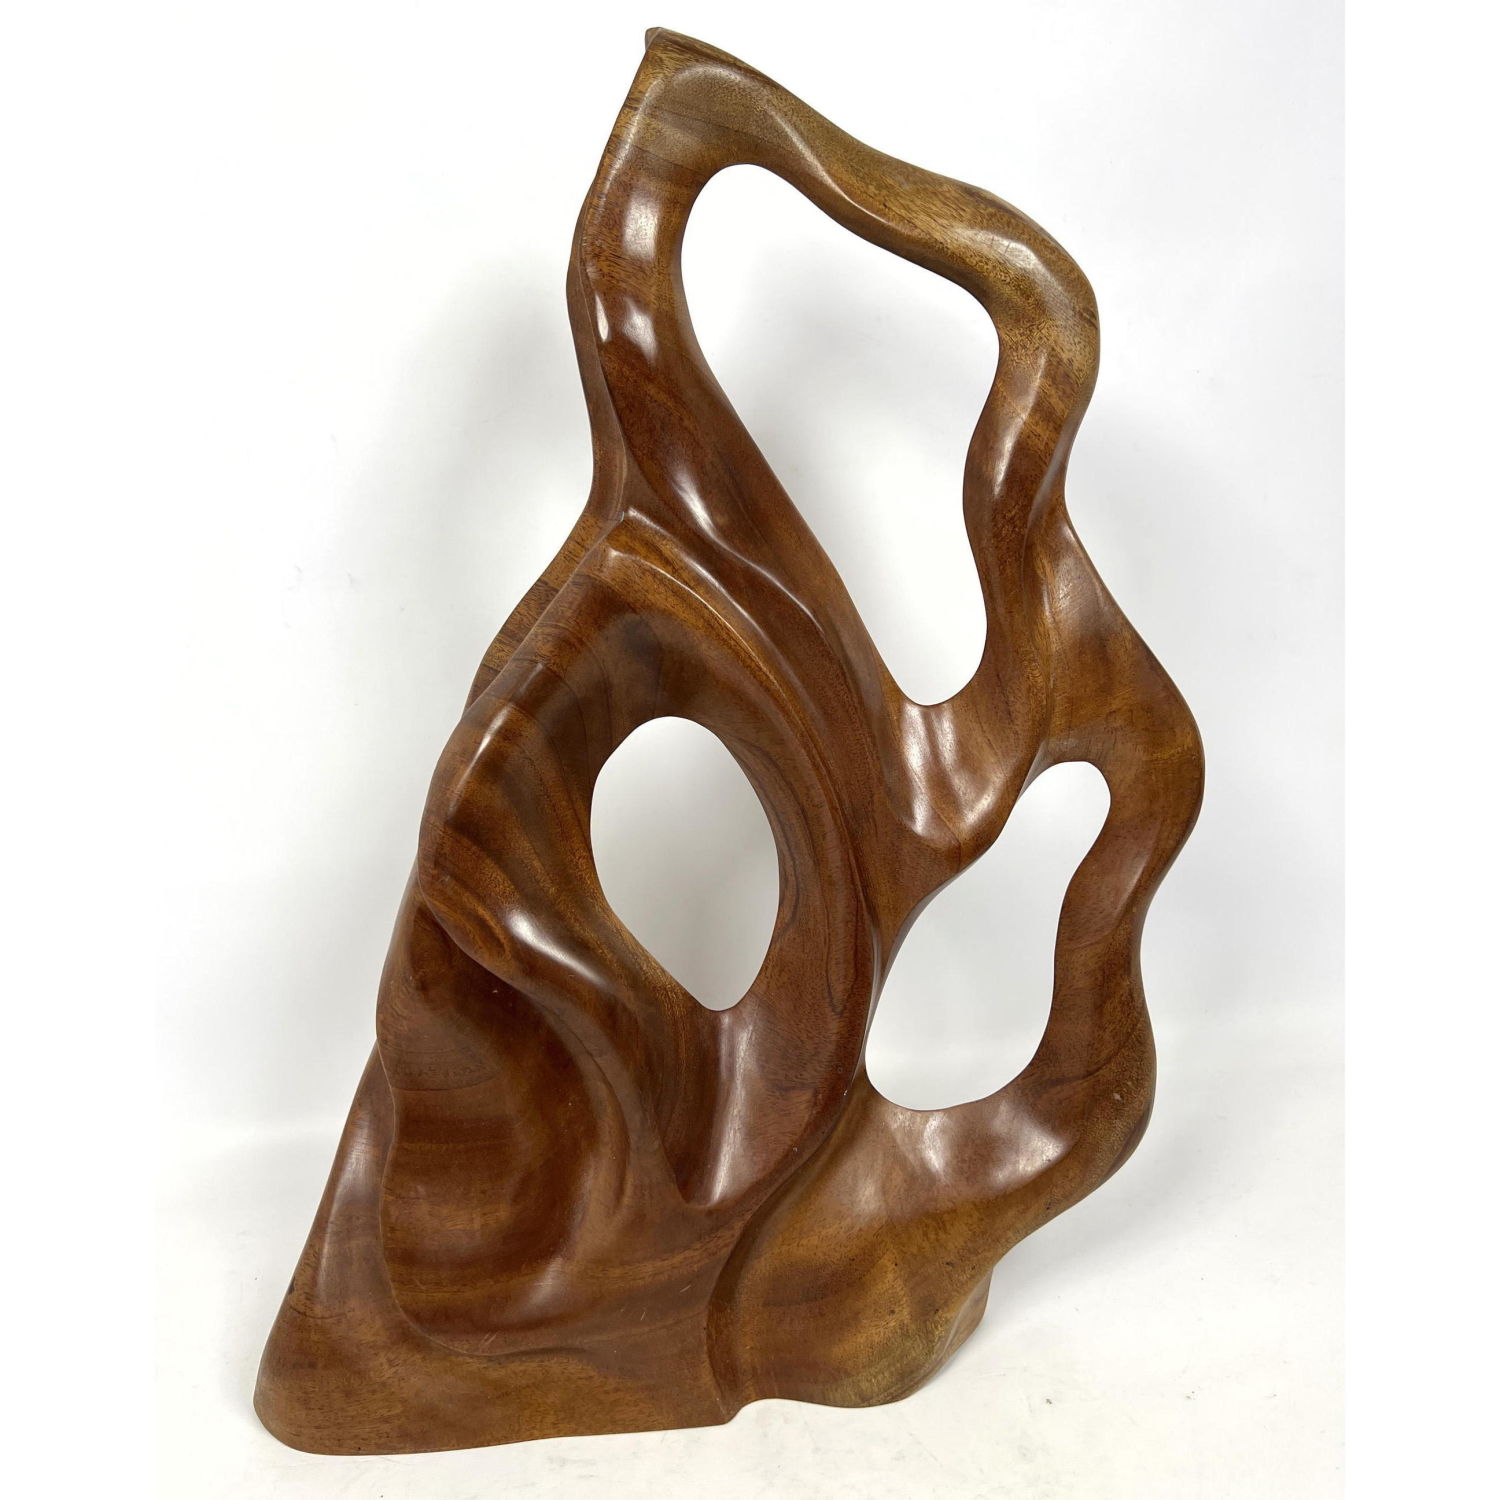 Carved Teak Wood Abstract Sculpture.